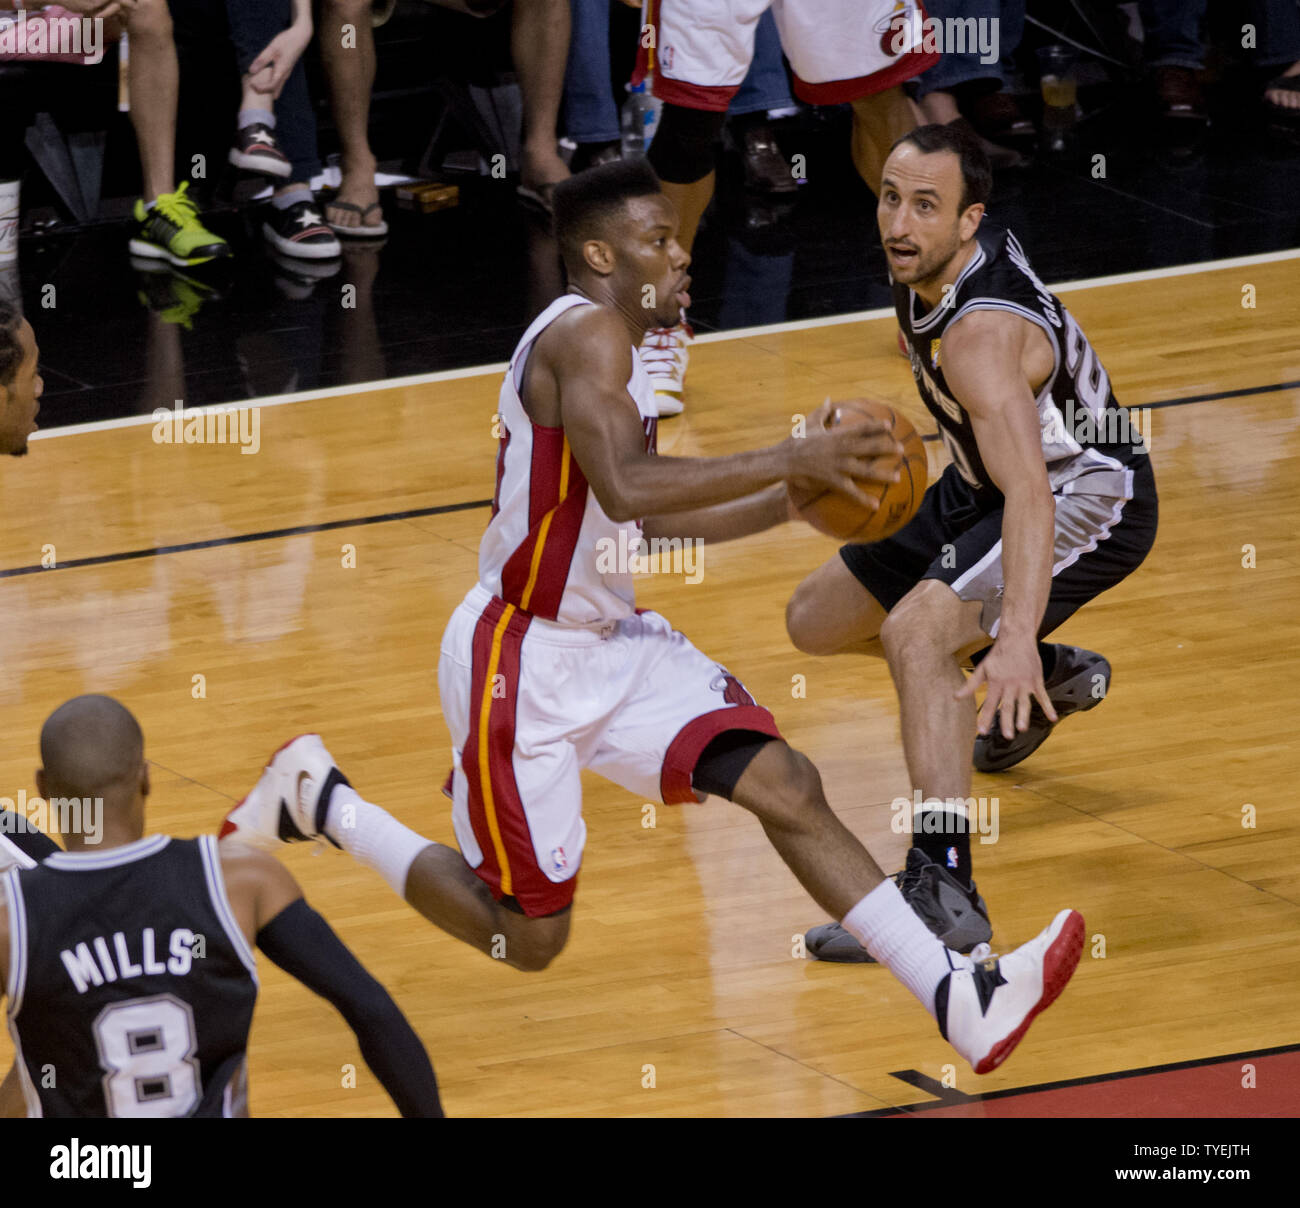 San Antonio Spurs Manu Ginobili (20) defends against  Miami Heat  Norris Cole (30) driving to the basket in game 3 of the NBA Finals at the American Airlines Arena, in Miami, June 10, 2014. The Spurs defeated the Heat 111-92 to take a 2 -1 game  lead in the best of seven series.    UPI/Gary I Rothstein Stock Photo